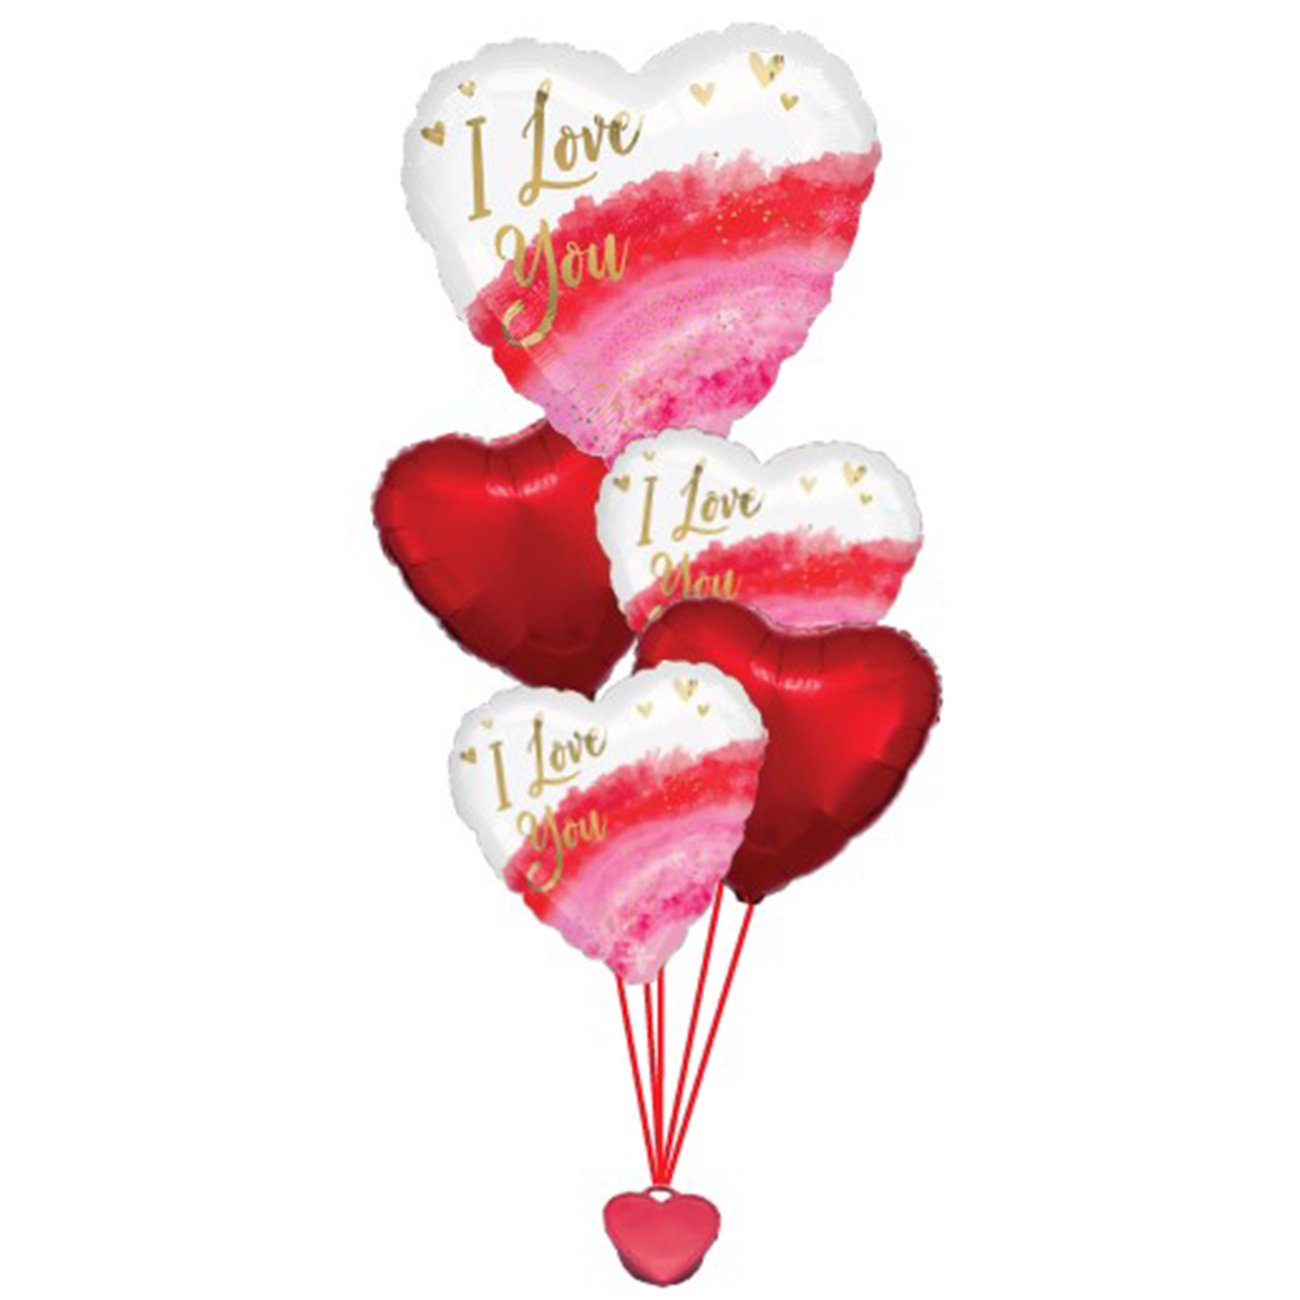 BLOOMS by H-E-B Gold Number Balloons - Shop Balloons at H-E-B